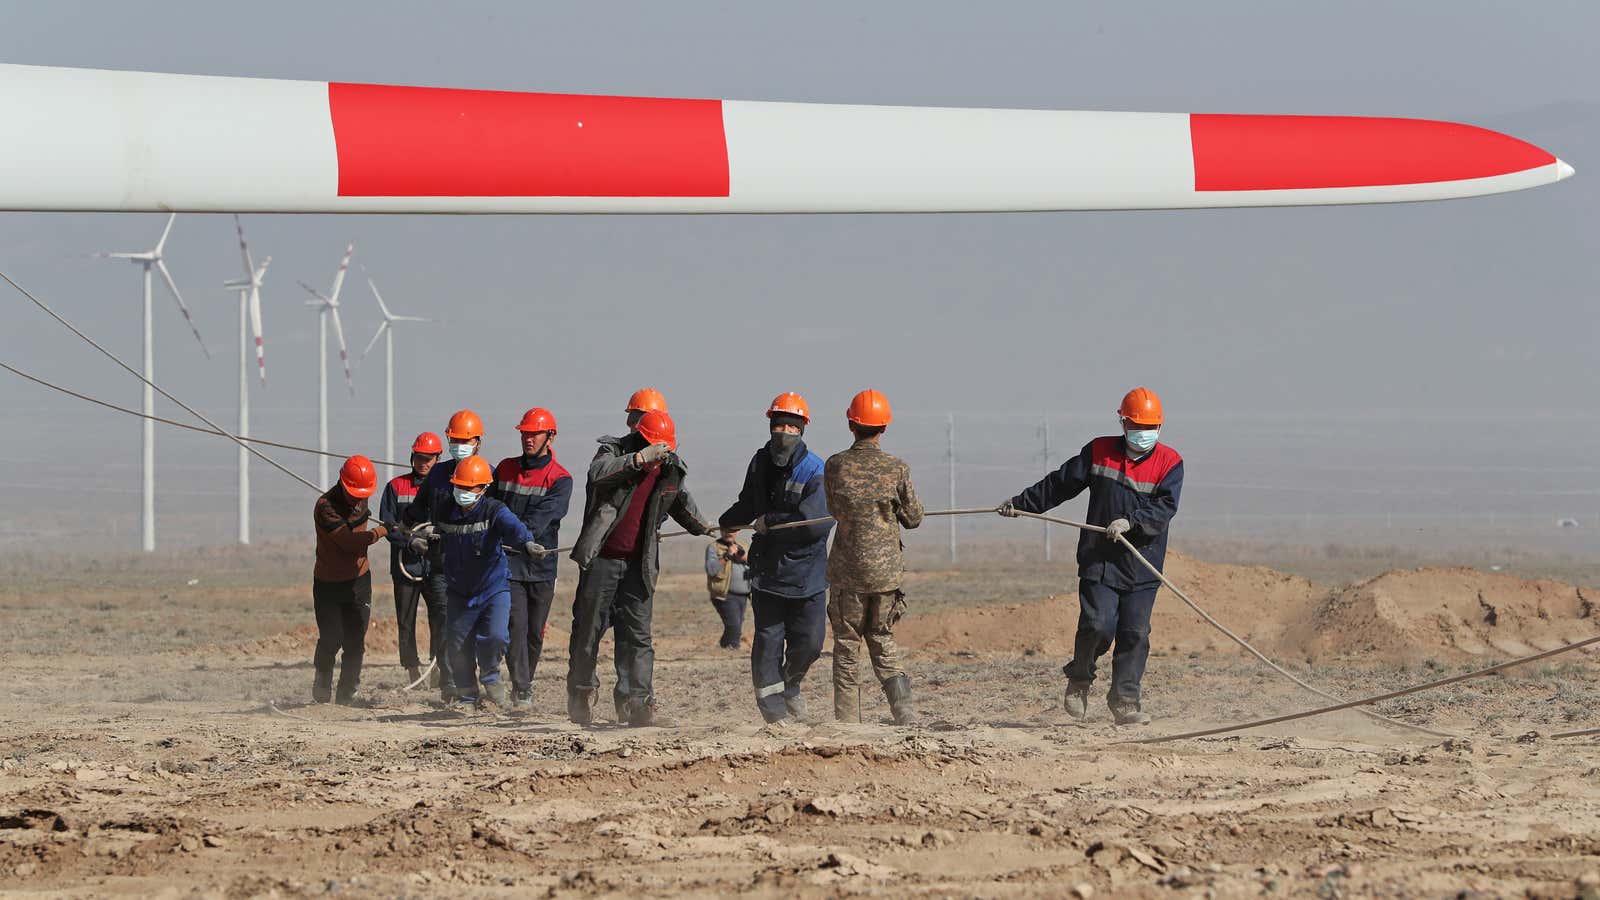 Installation of wind farms has become a major source of global employment.